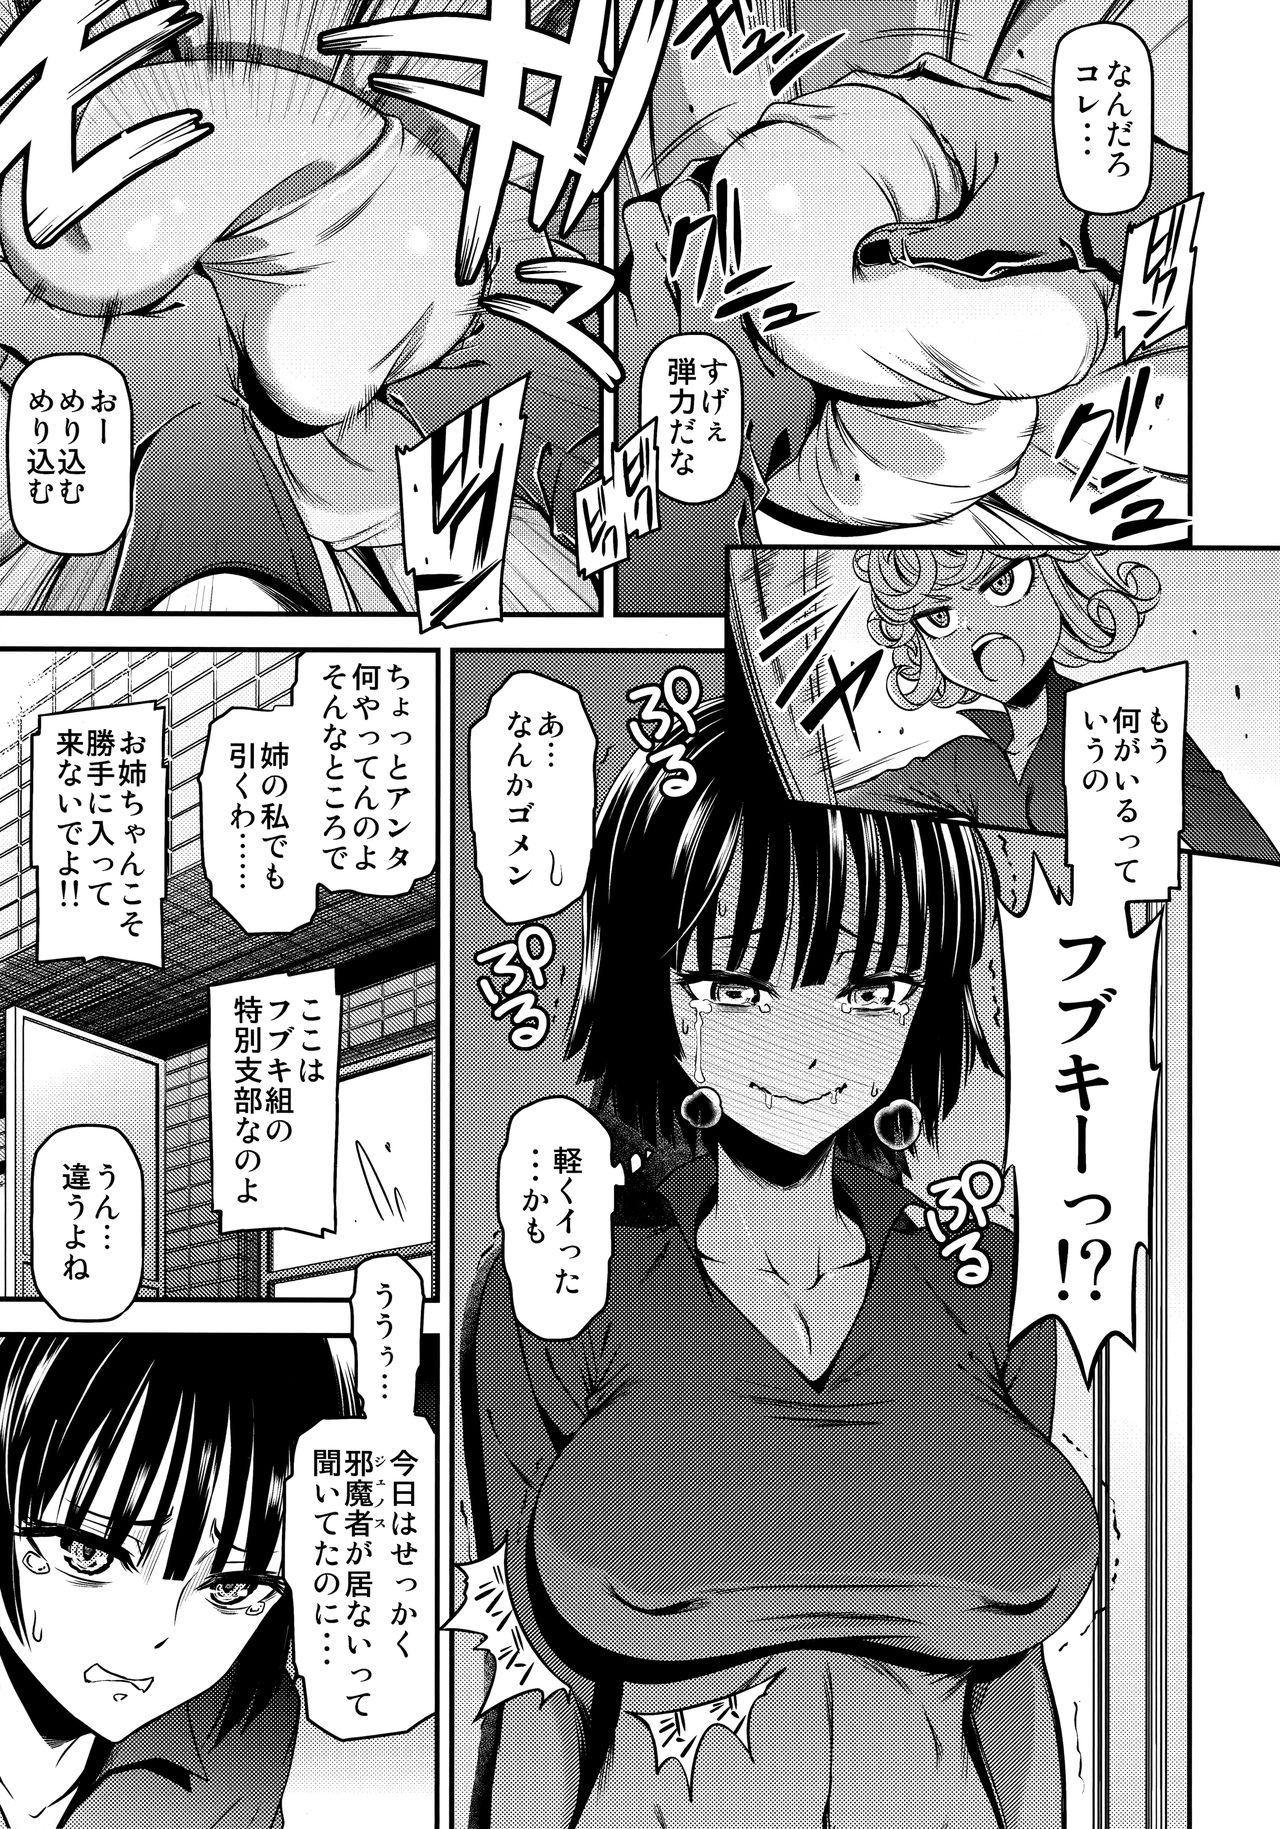 Tranny ONE-HURRICANE 4 - One punch man Style - Page 6